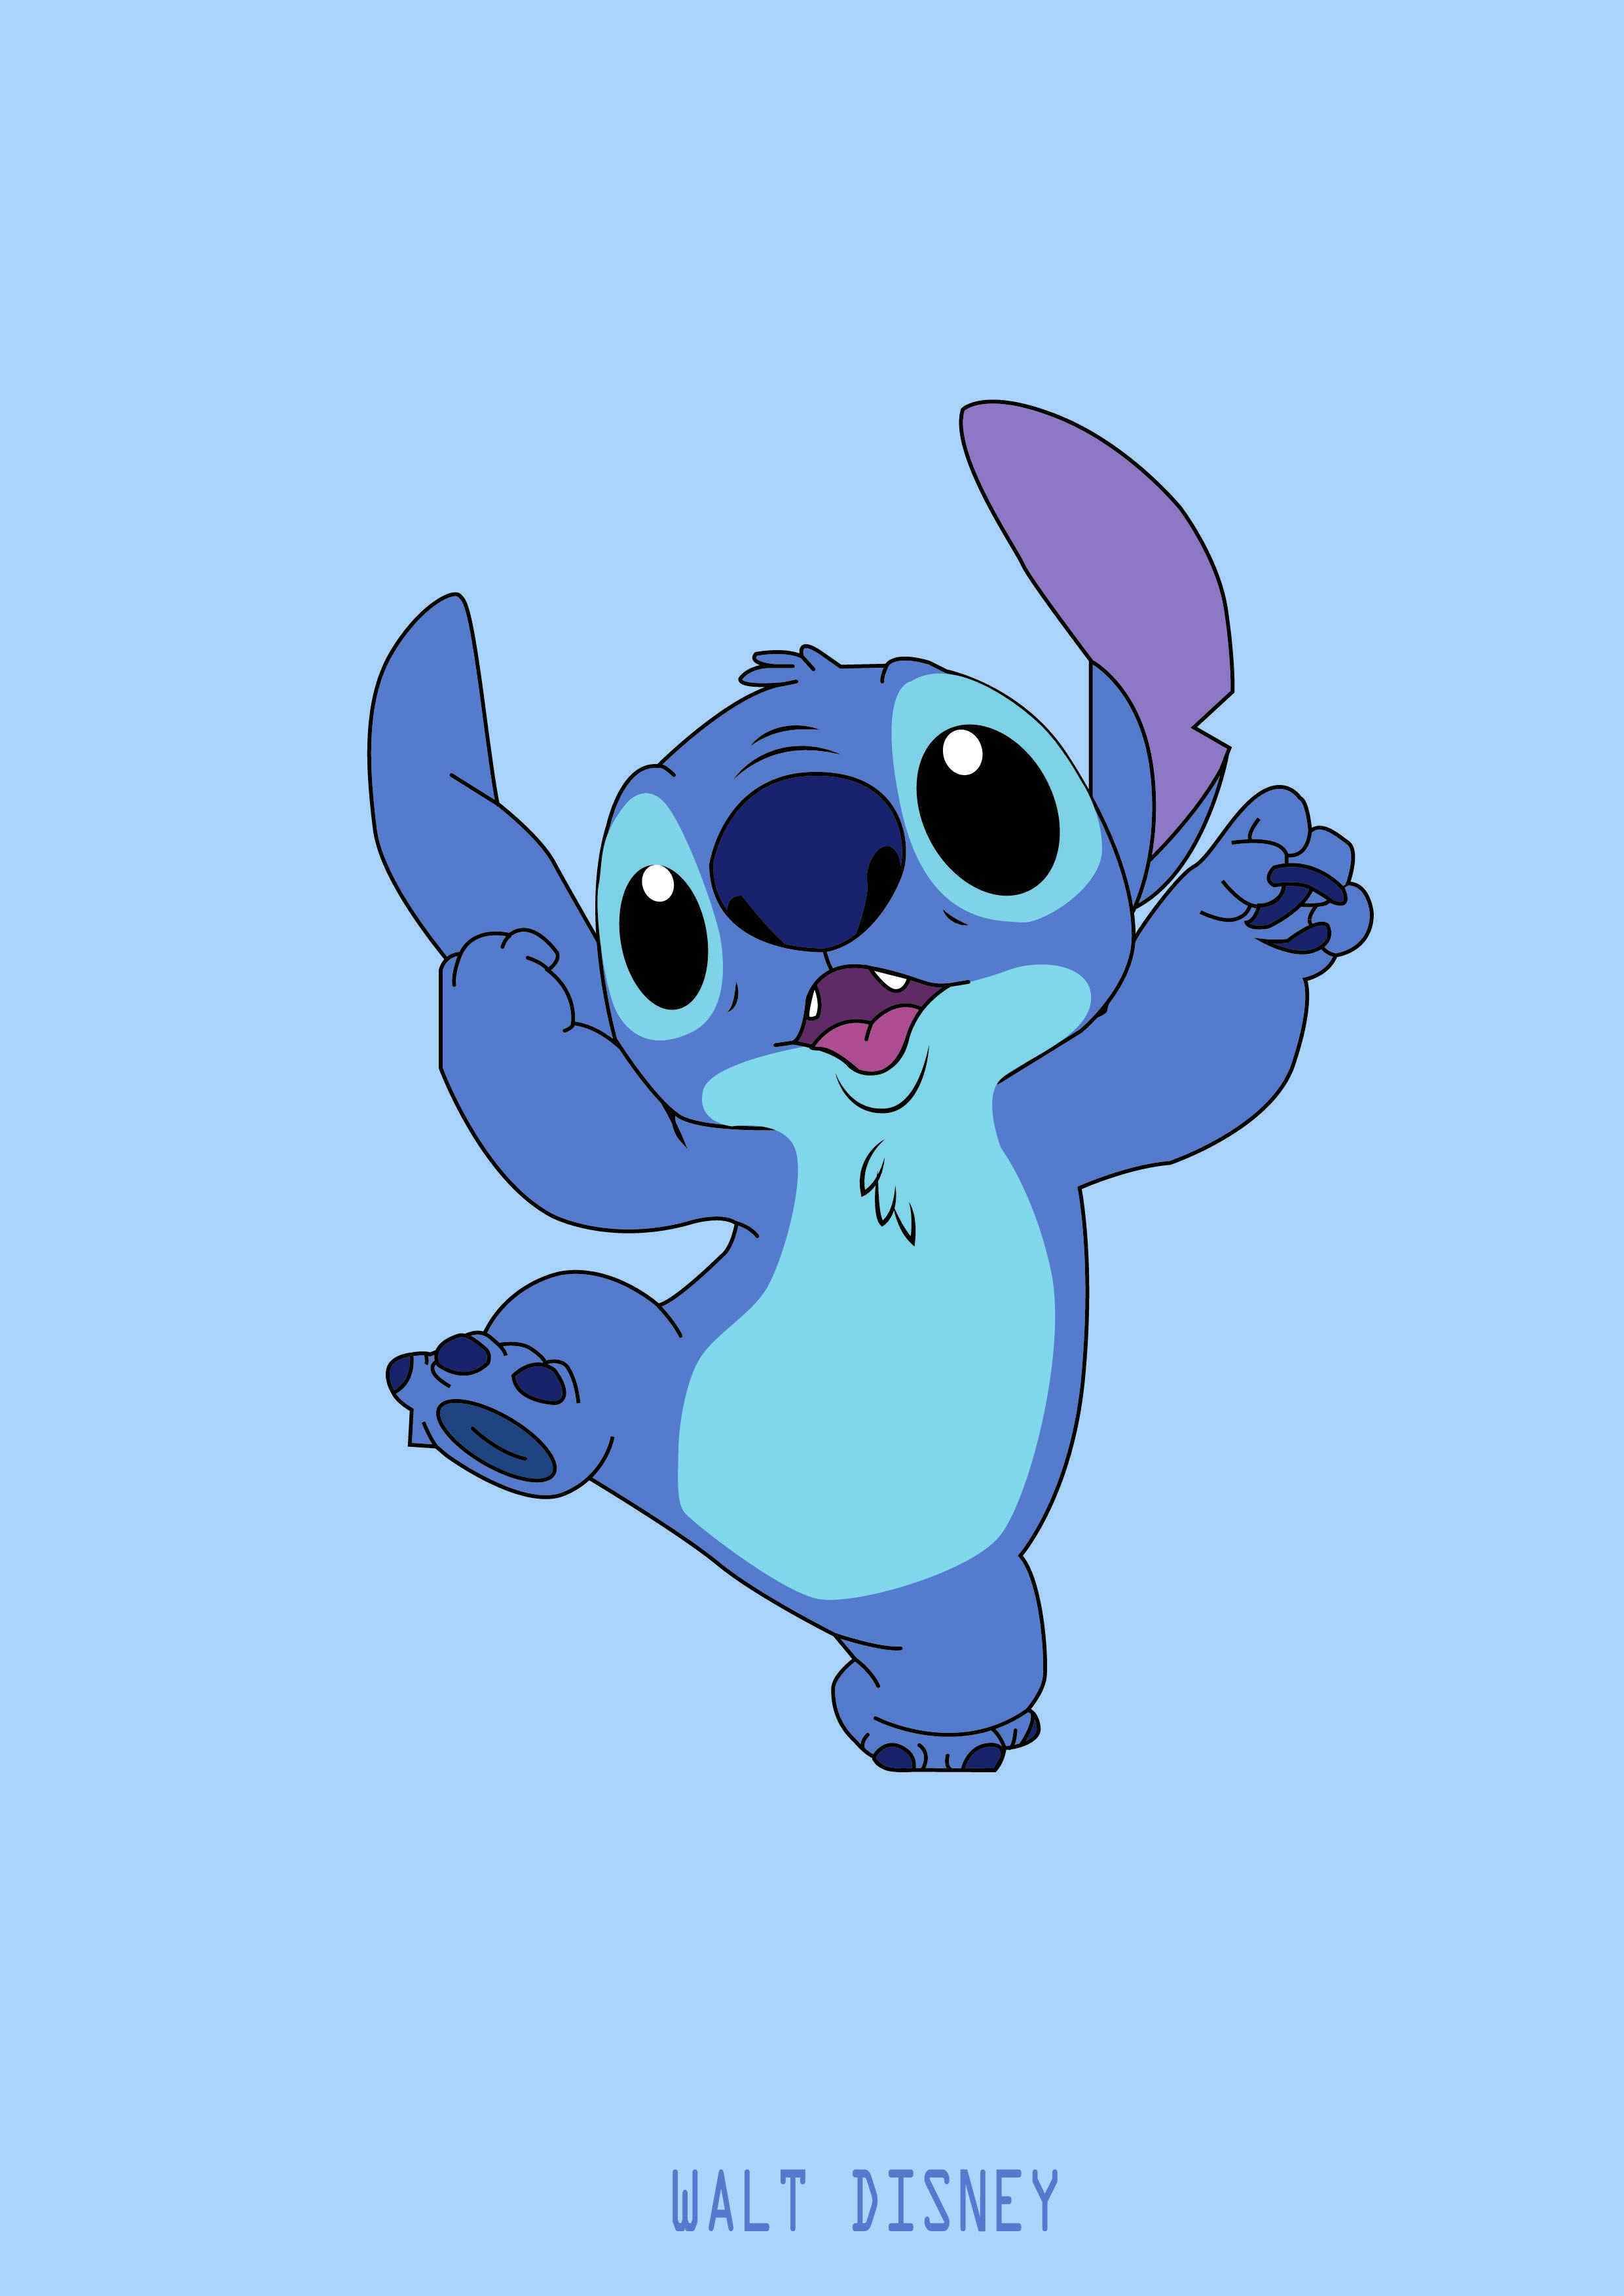 Disney stitch is a cartoon character from the movie - Stitch